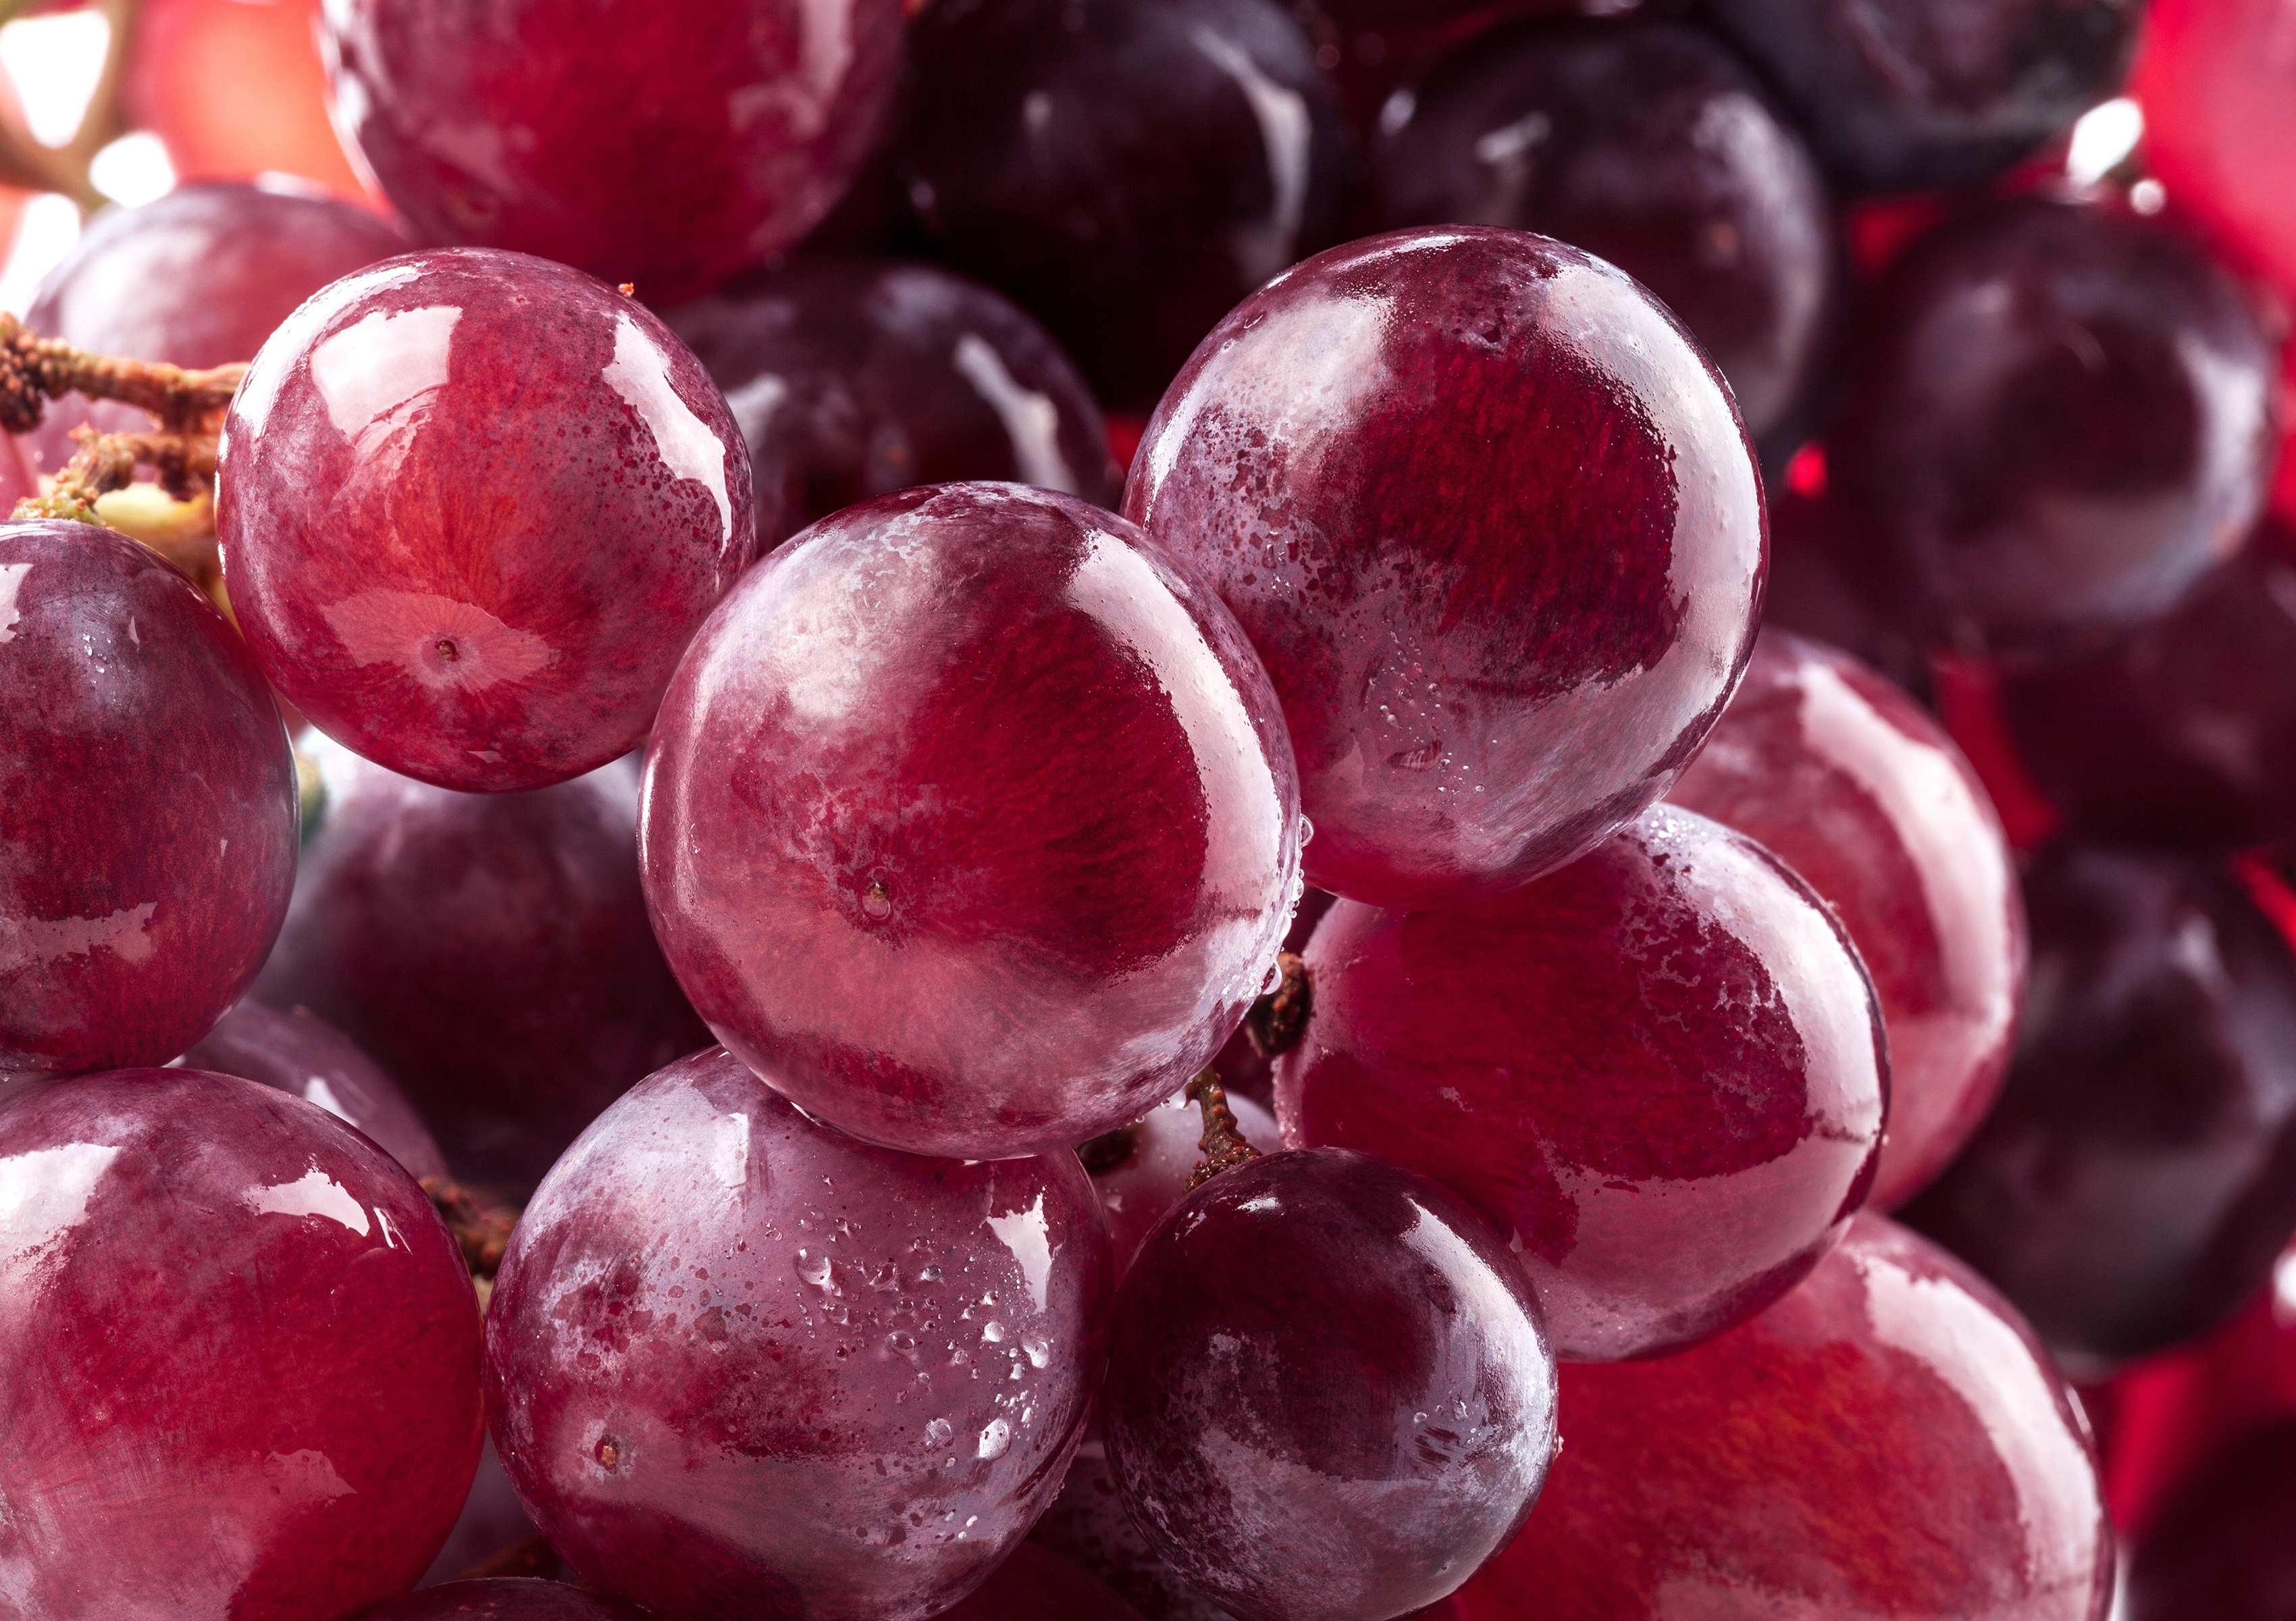 113589 download wallpaper berries, grapes, macro, ripe screensavers and pictures for free